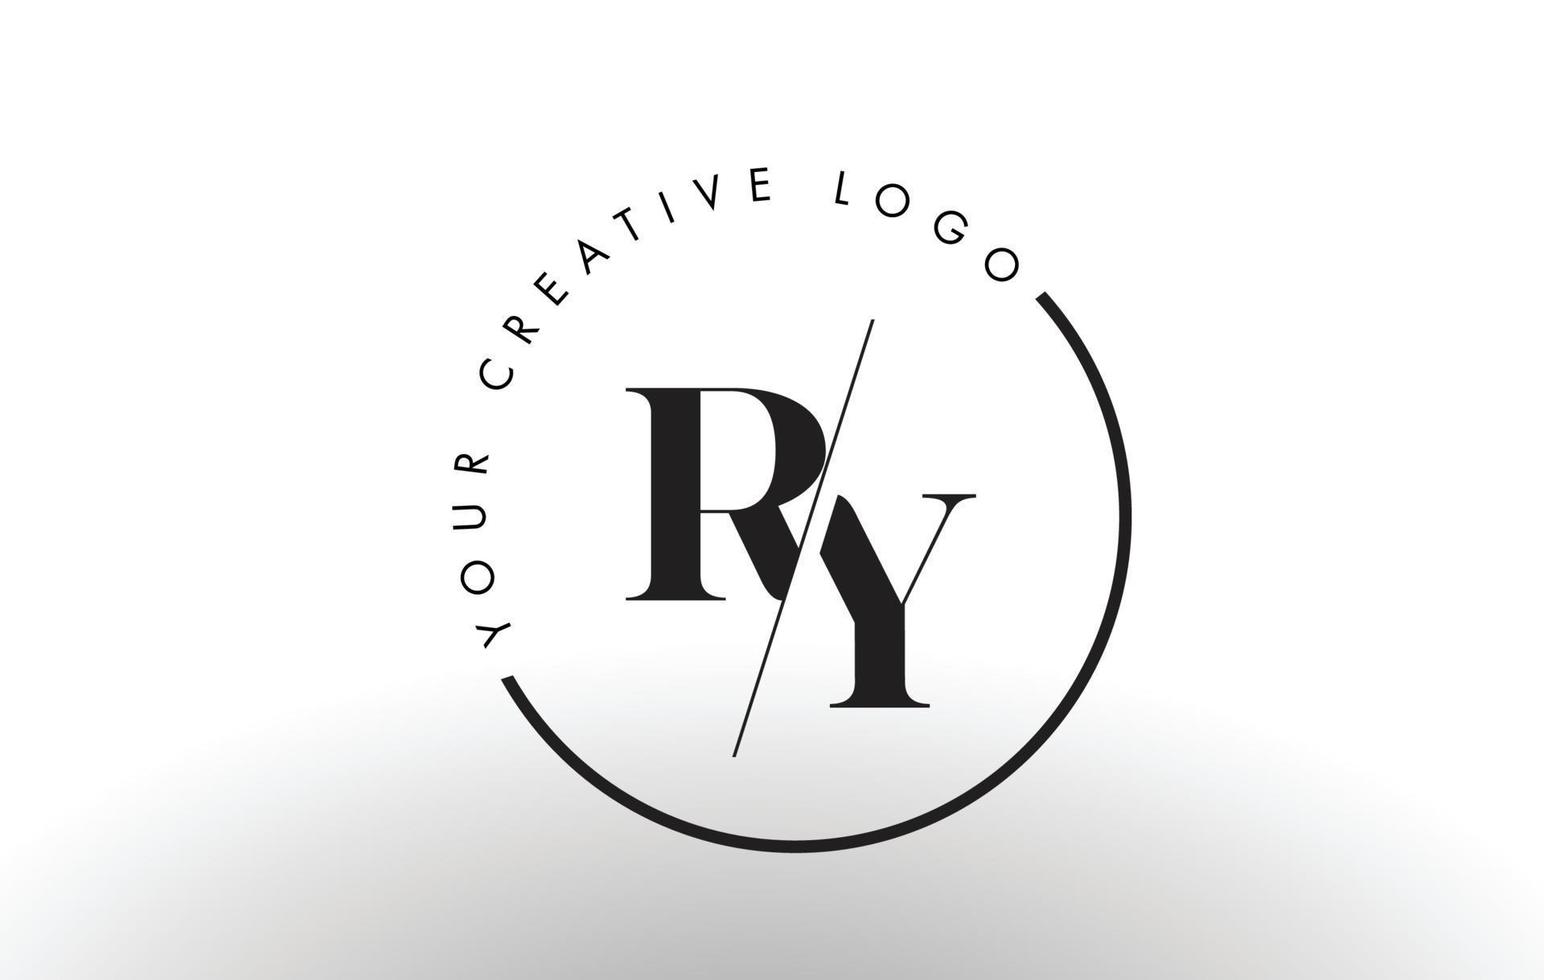 RY Serif Letter Logo Design with Creative Intersected Cut. vector